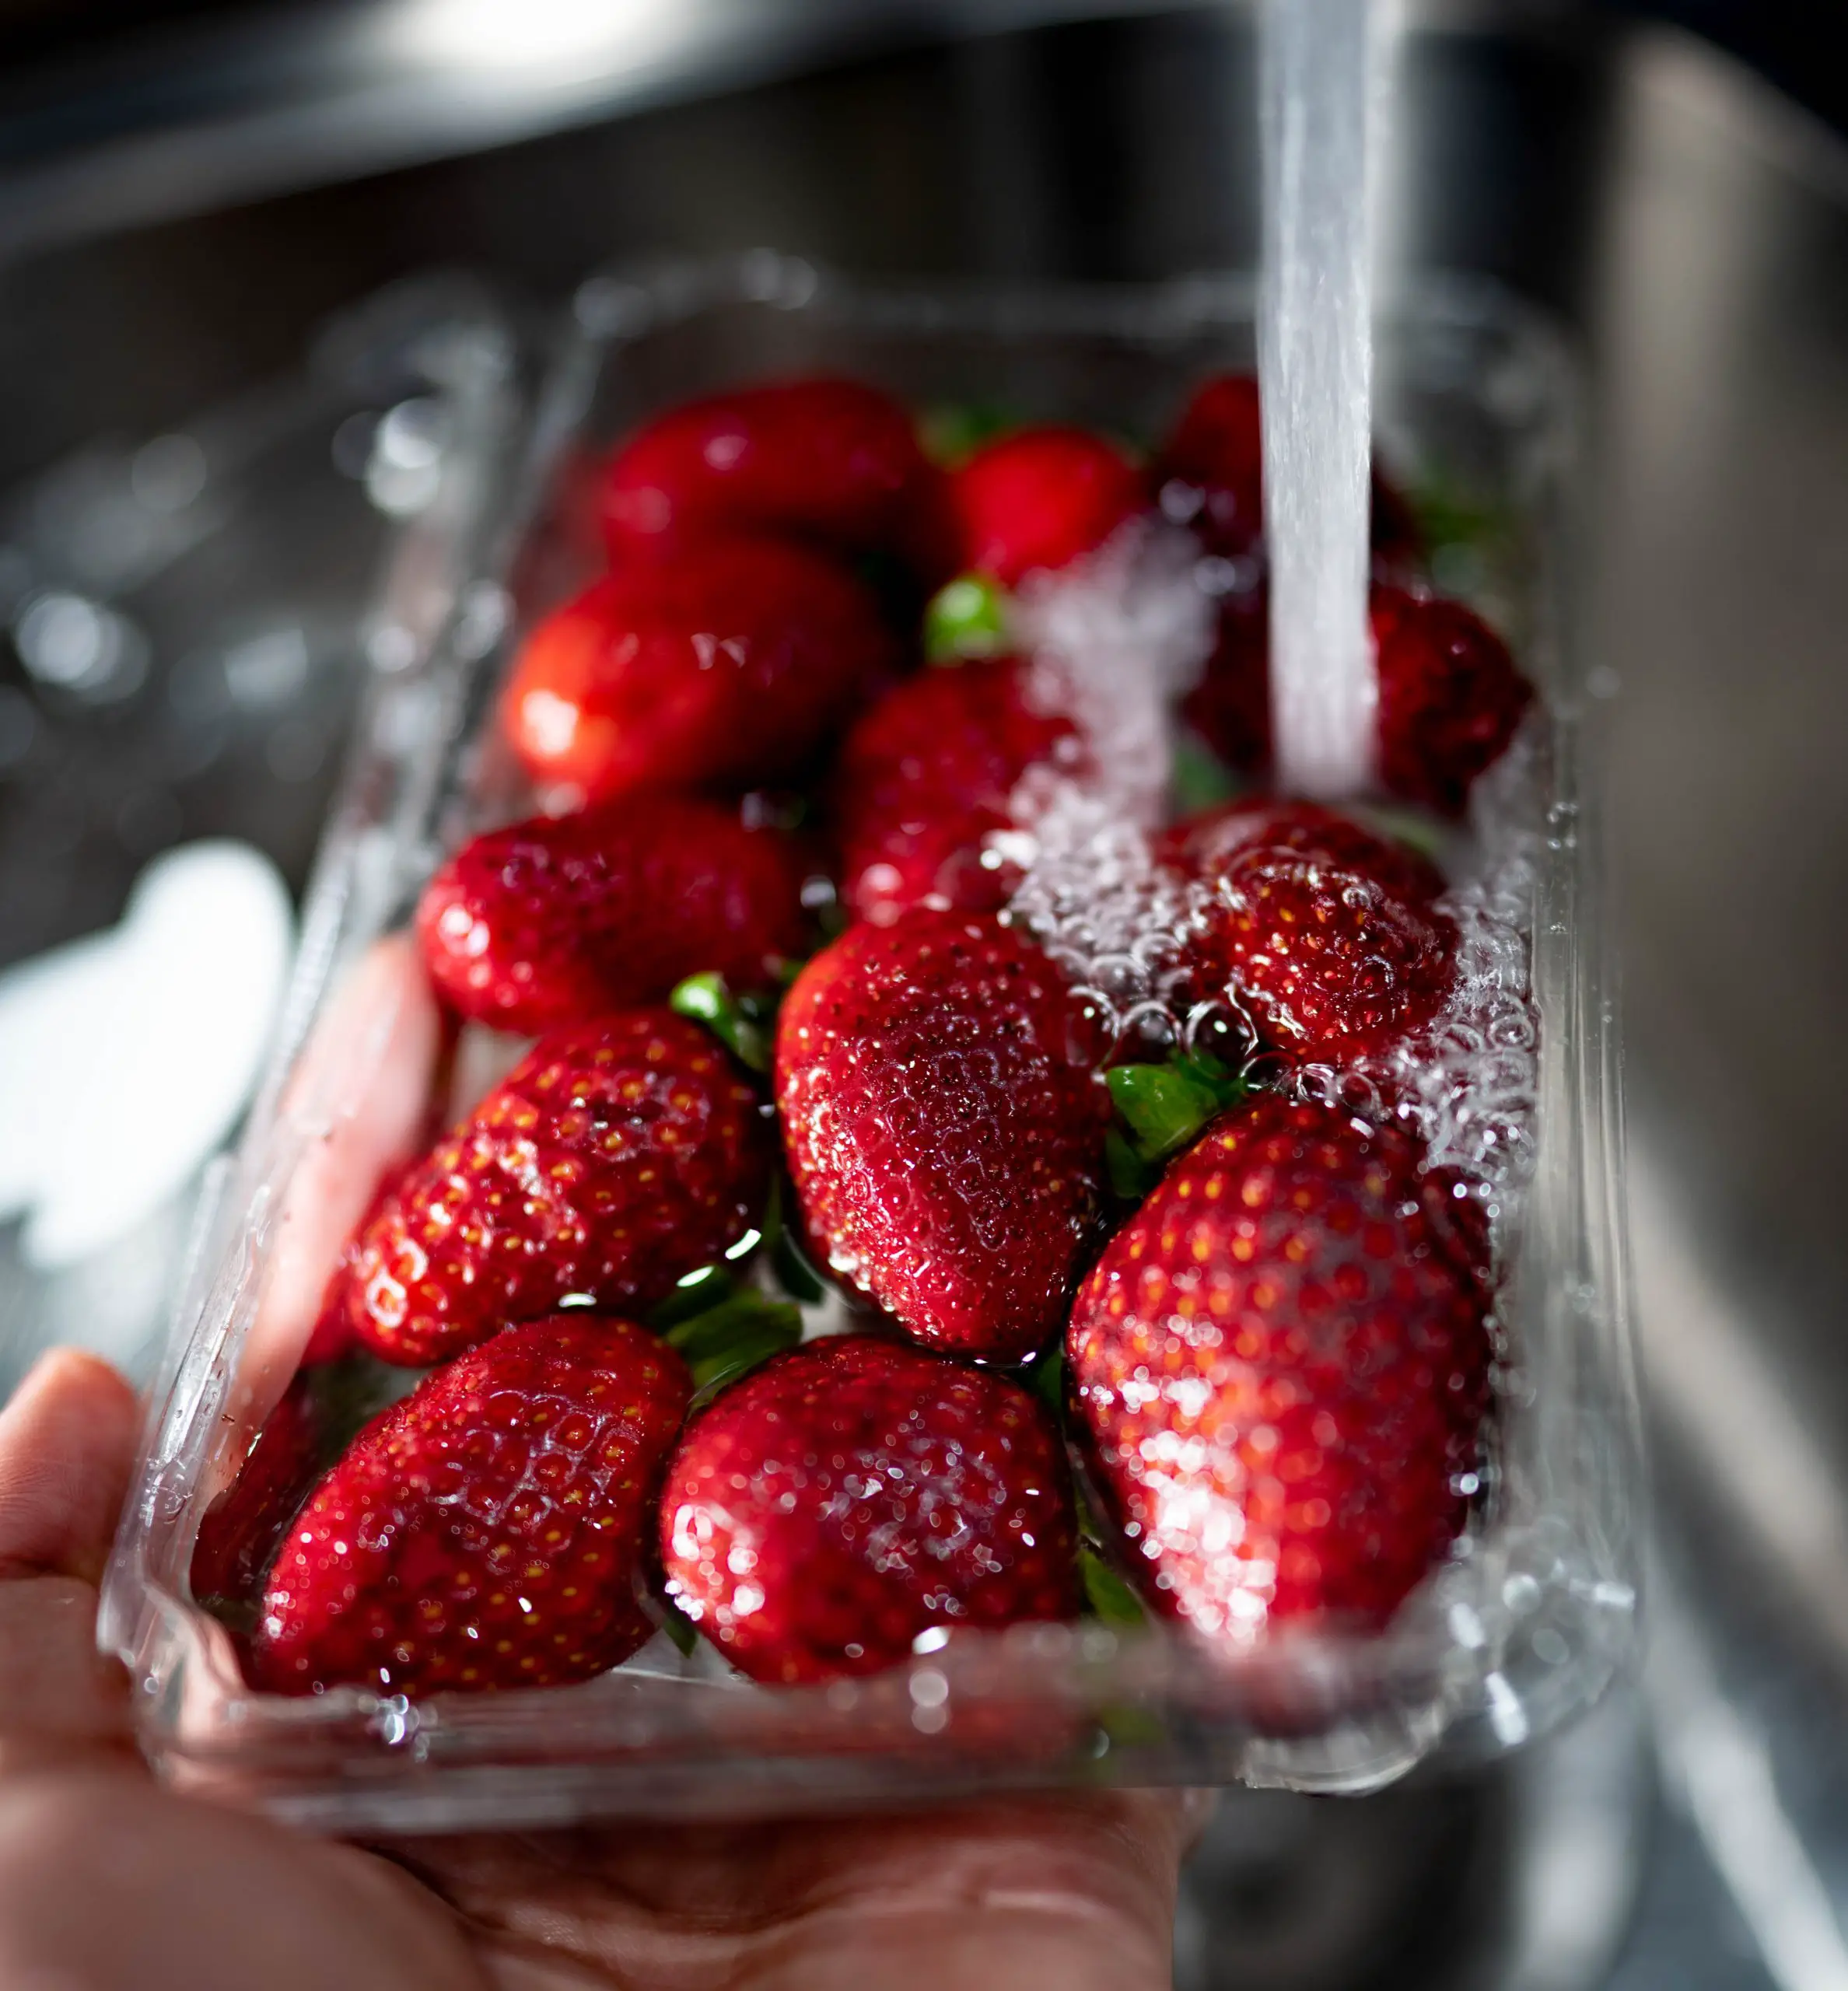 How to Store Strawberries After Washing (2)